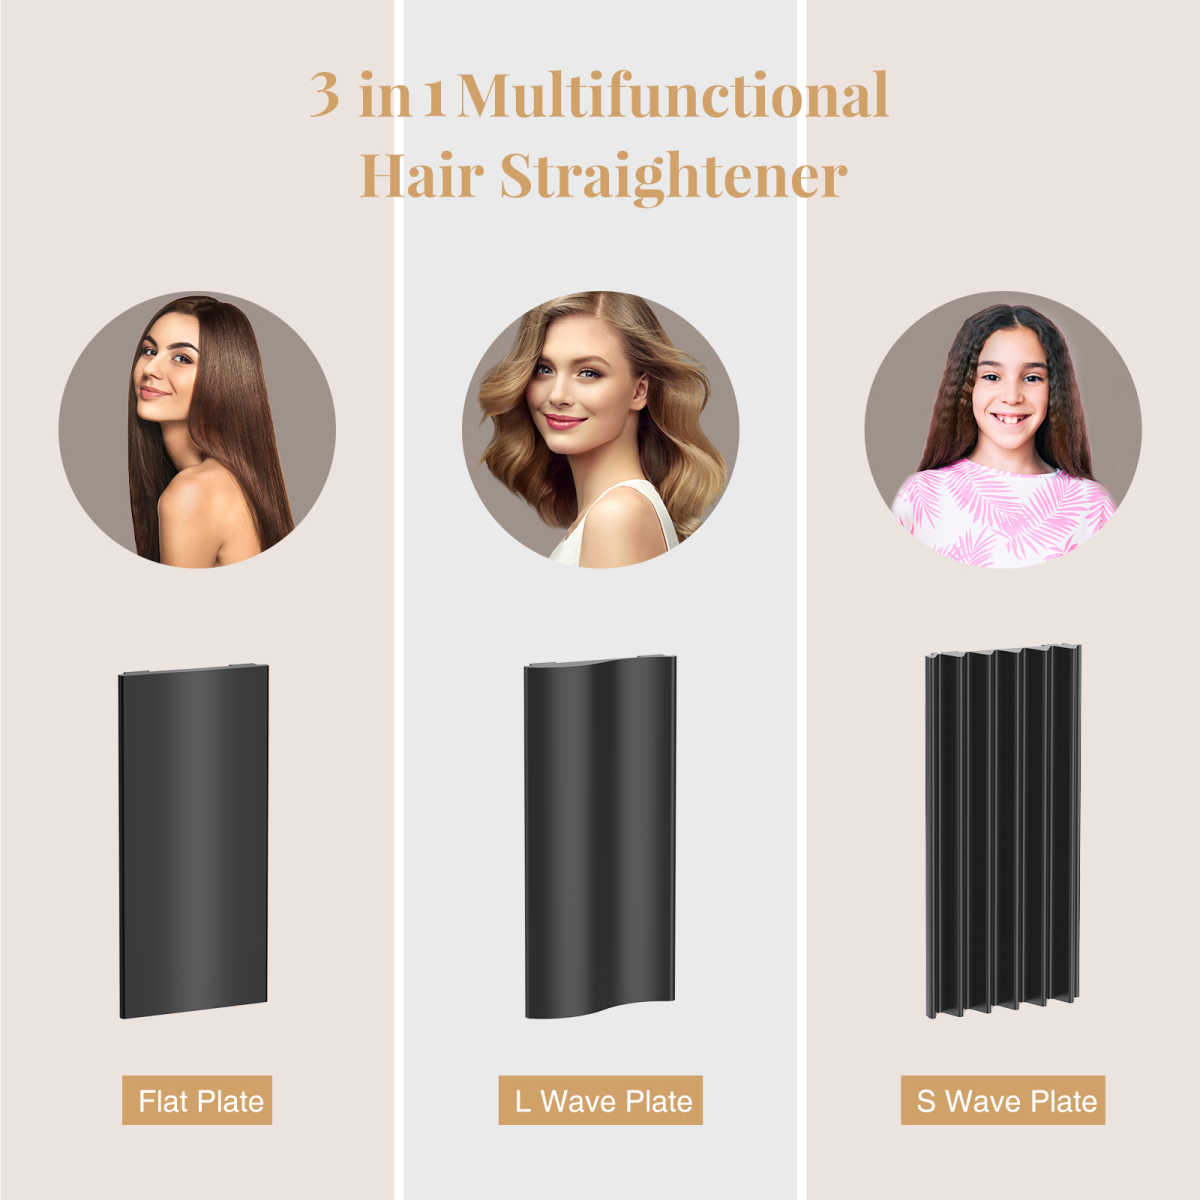 3 in 1 straight hair device